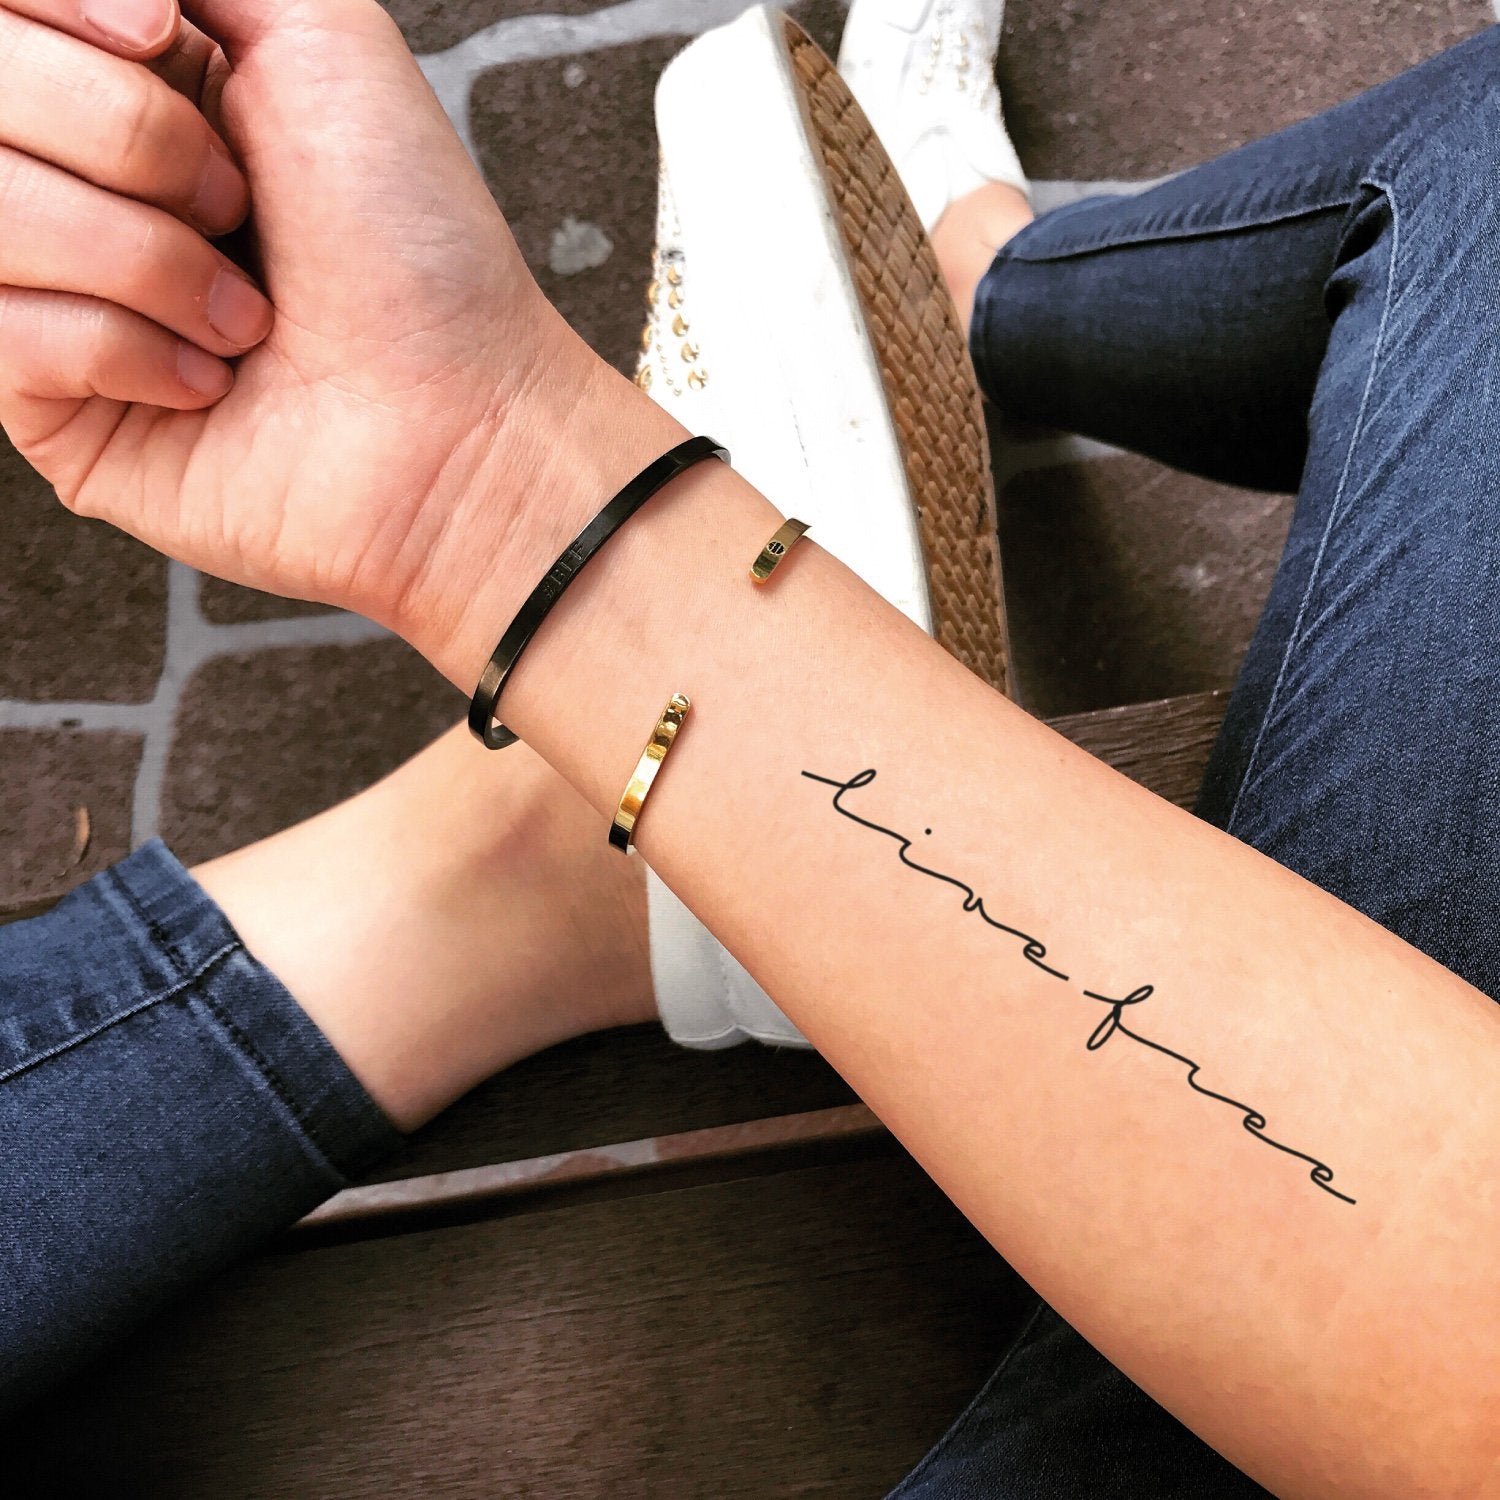 Here Are 11 Beautiful Tattoo Ideas For Those Who Are Free-Spirited & Live  Life On Their Terms